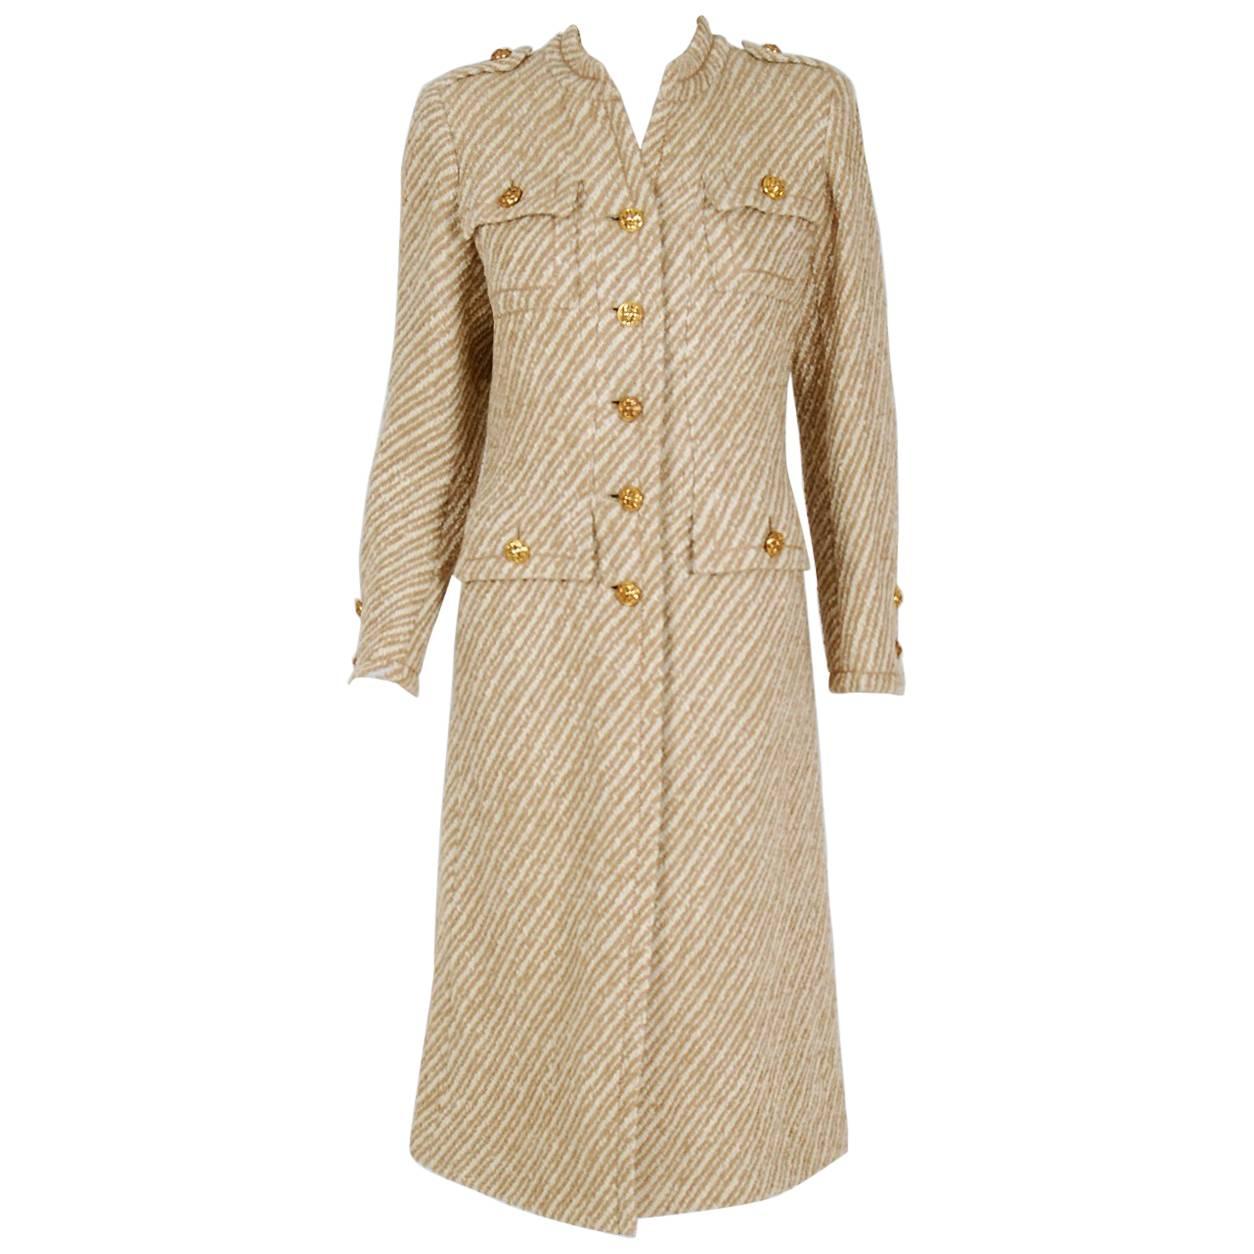 1972 Chanel Haute-Couture Ivory & Beige Striped Wool Mod Military Jacket Coat